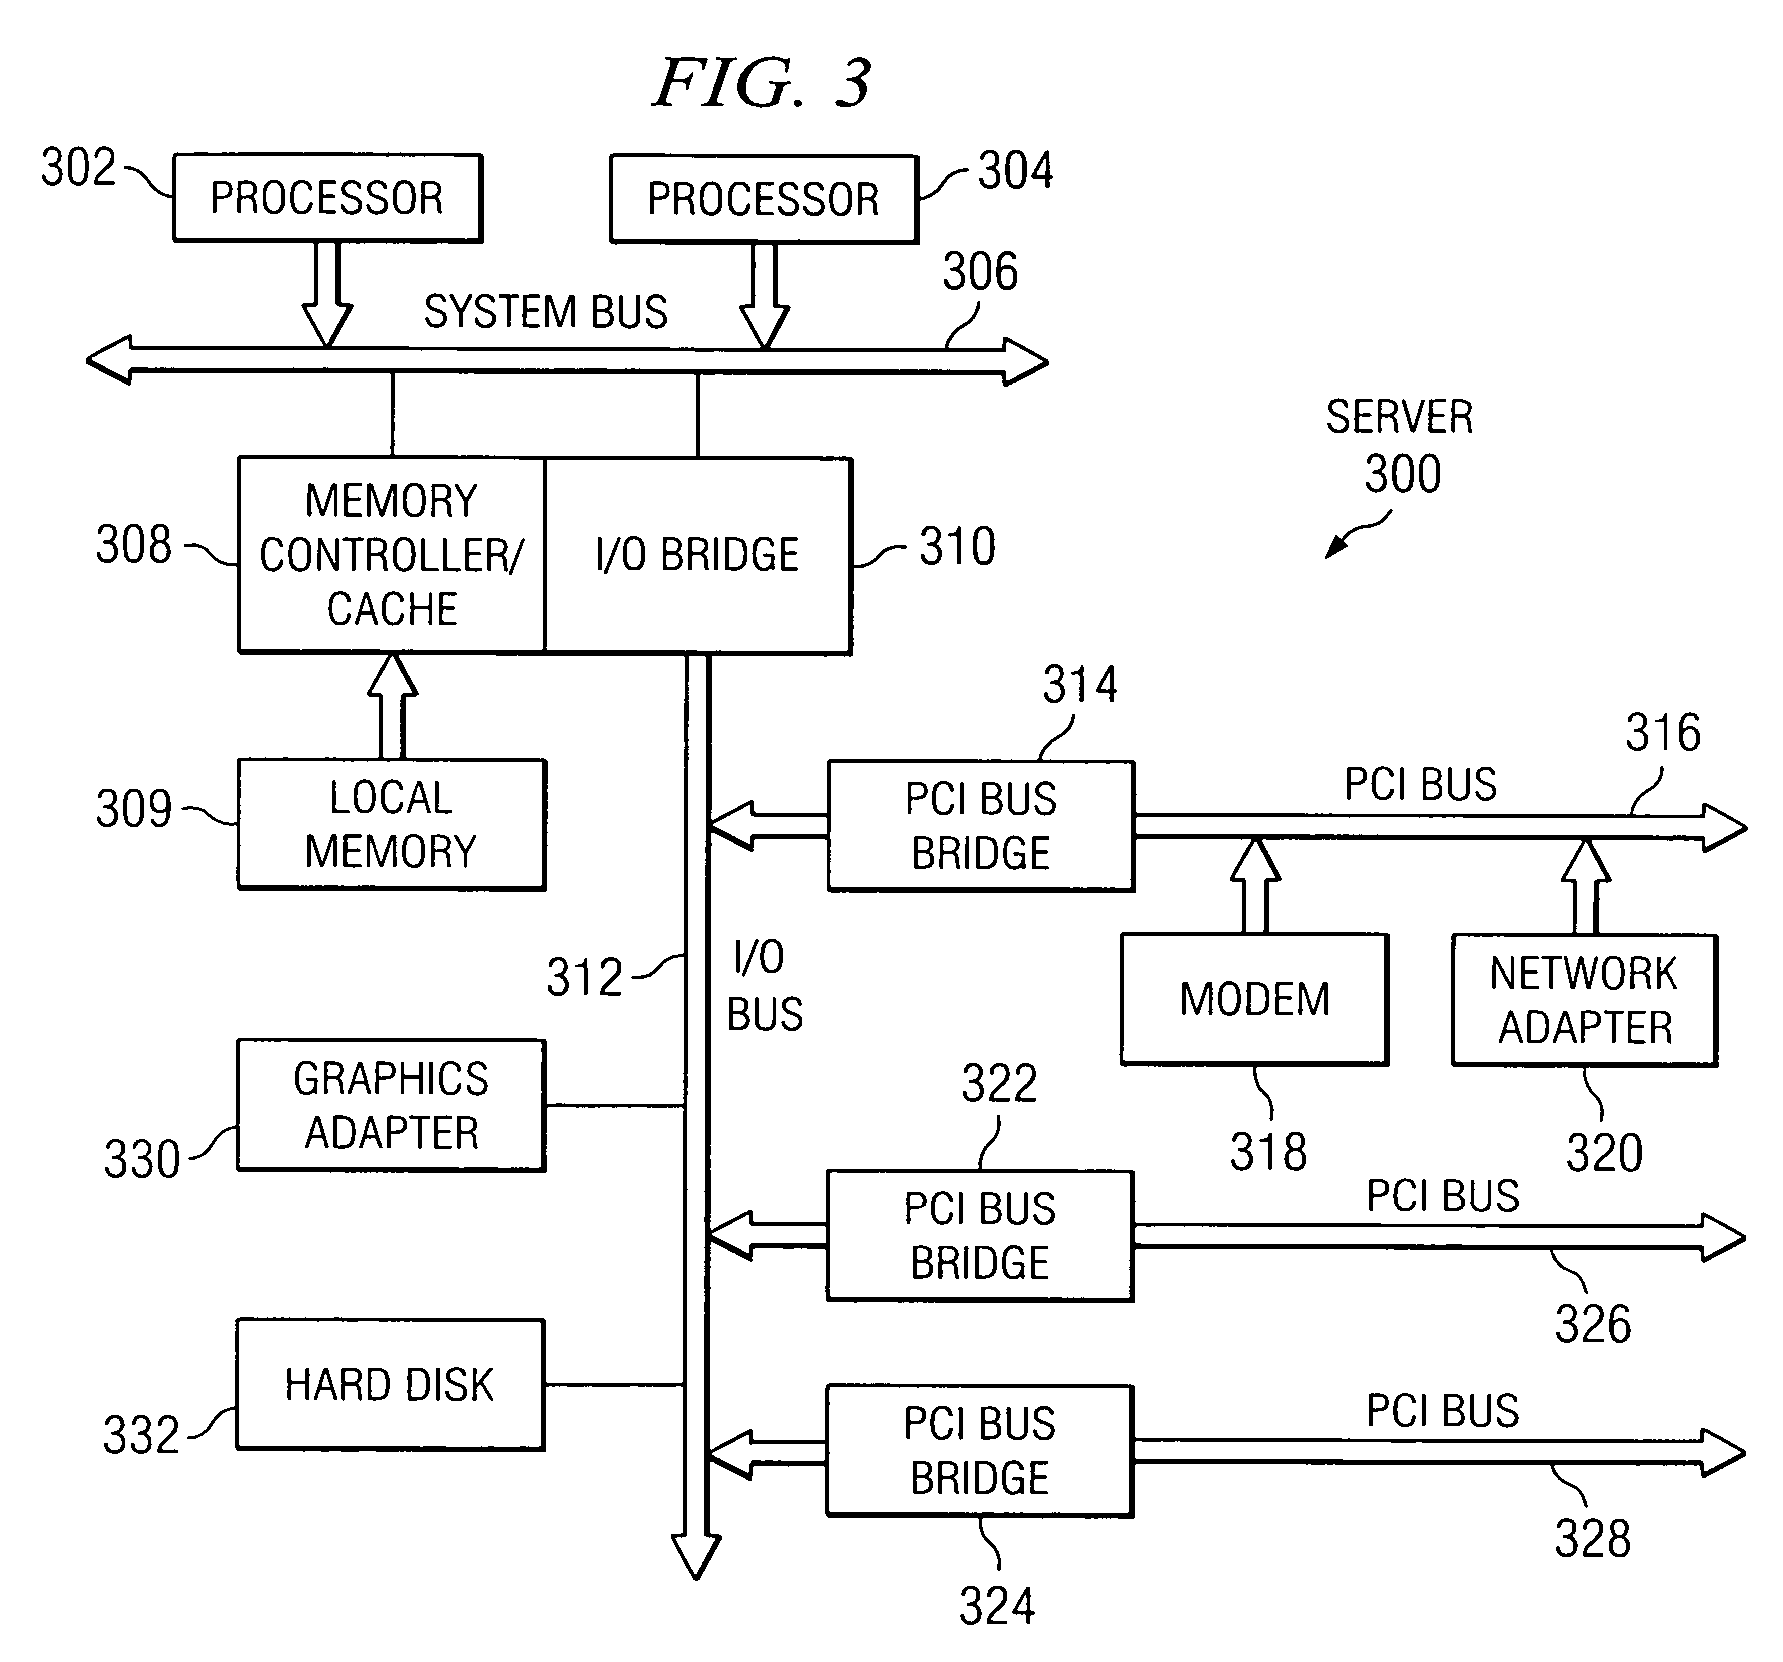 Method, apparatus, and computer program product for one-step correction of voice interaction